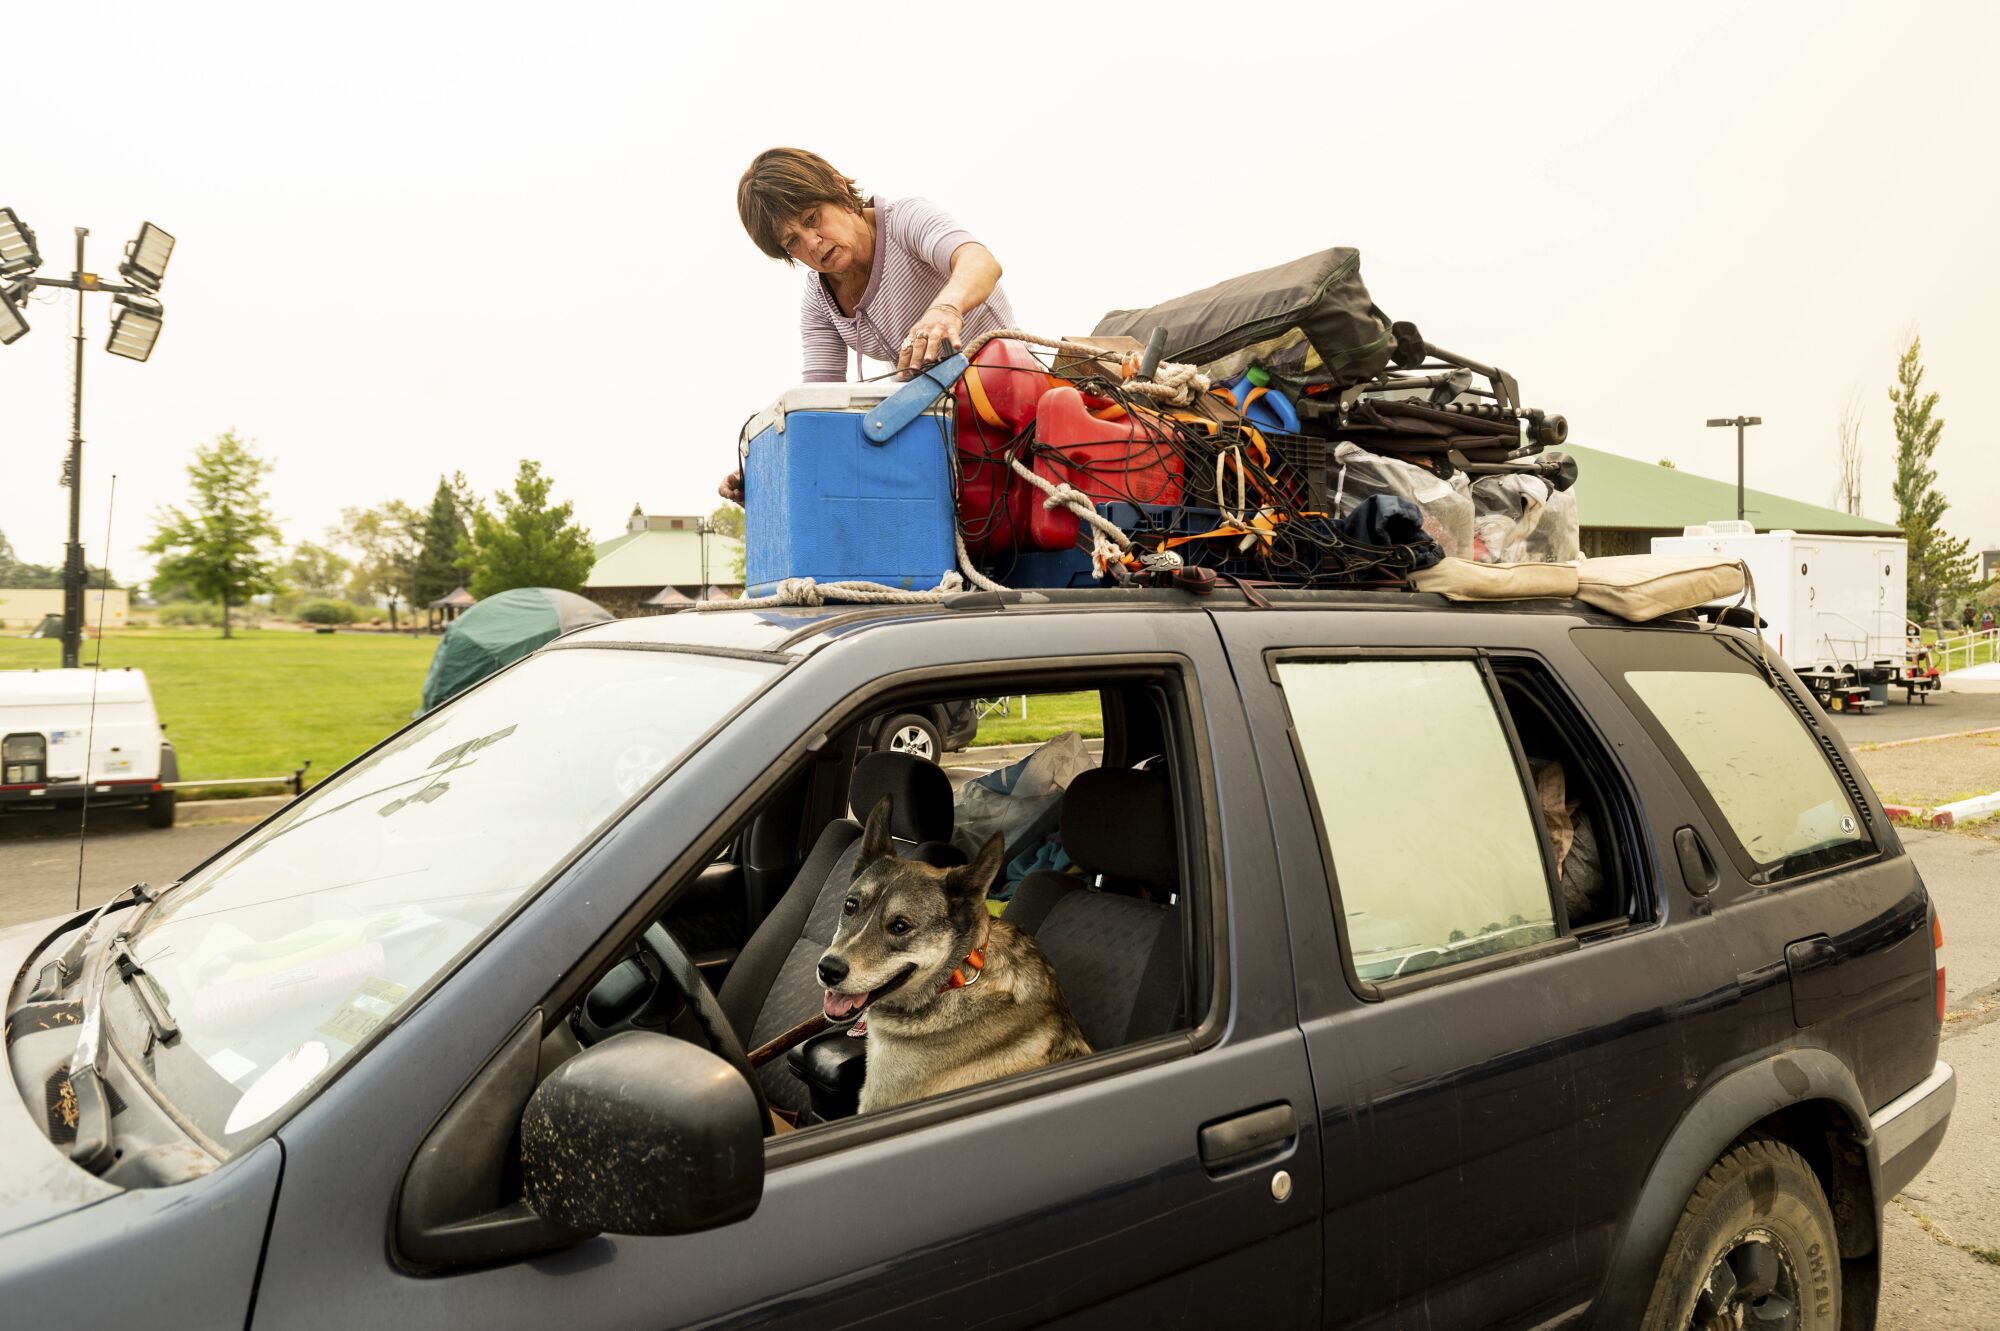 A woman kneels atop her car with a pile of belongings. A dog sits in the car's driver's seat.